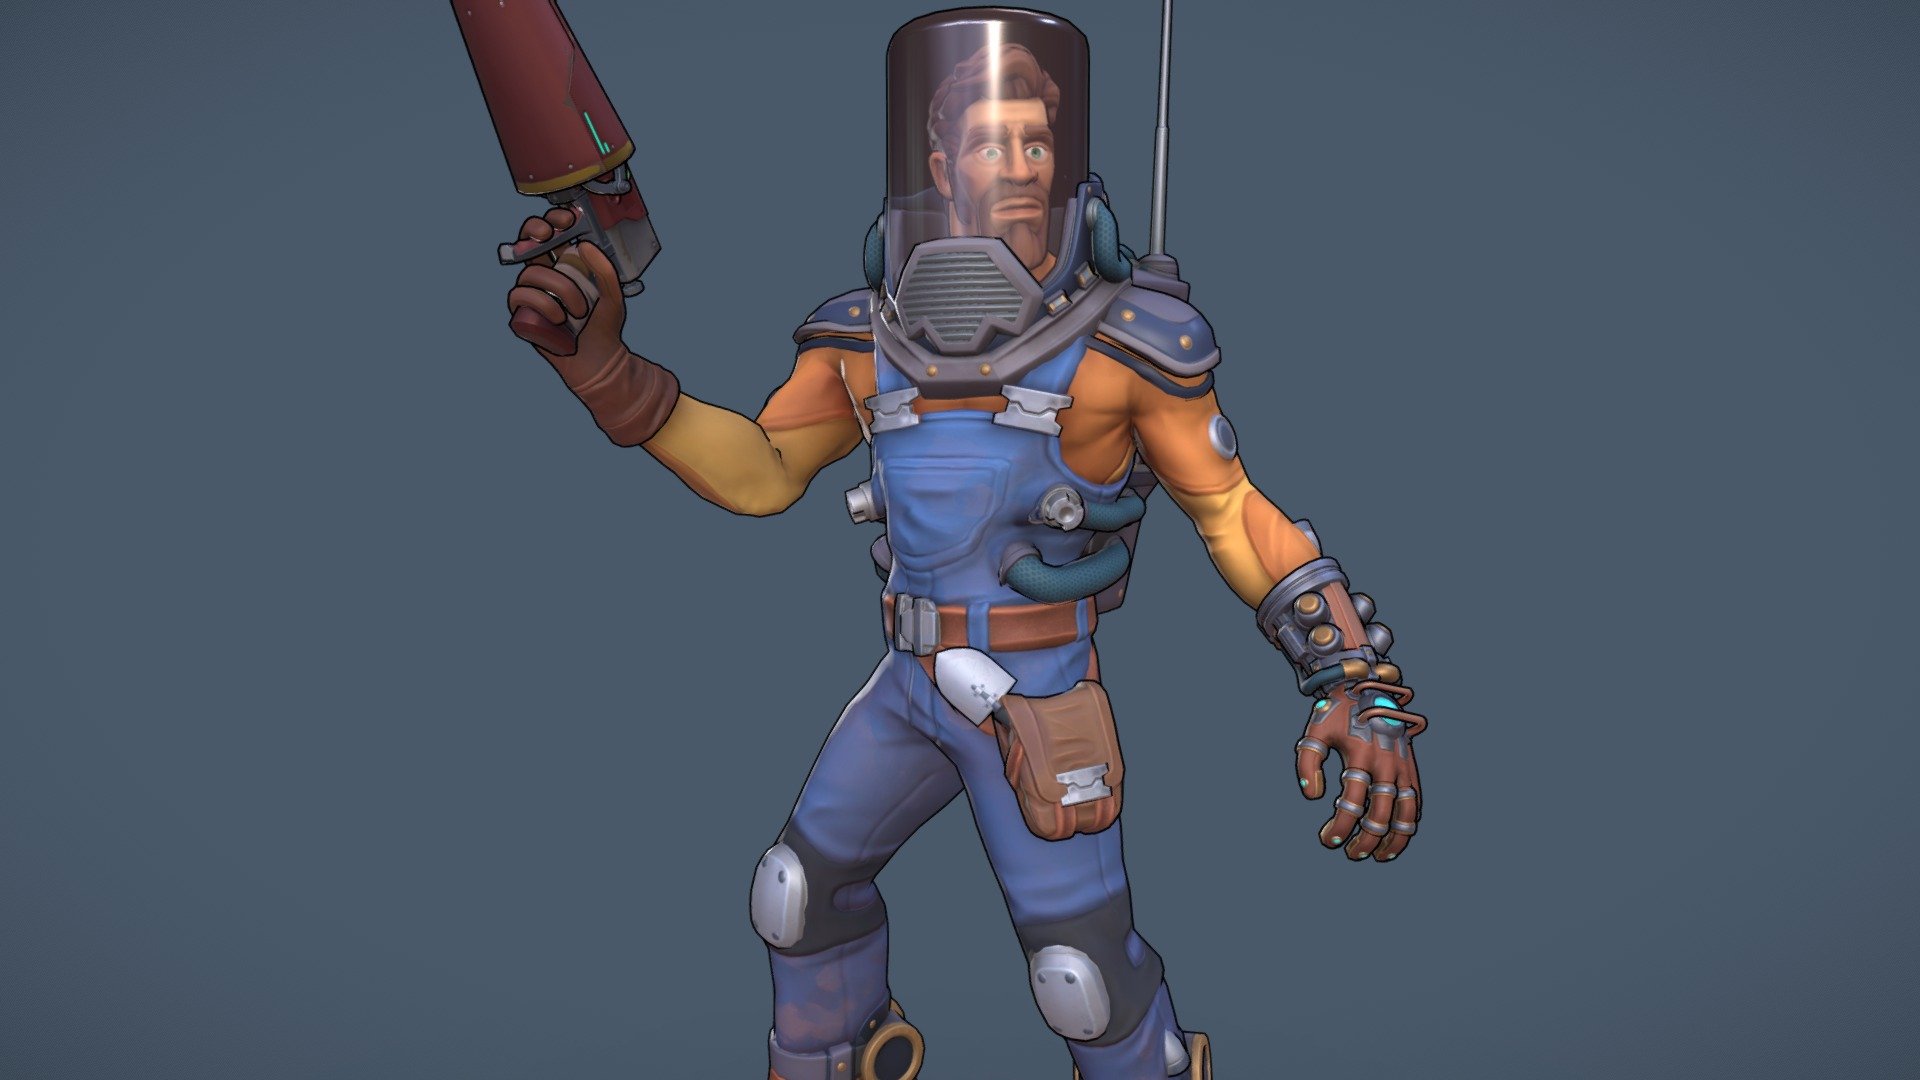 The main character of my end of studies work I made as a last year student at Haute Ecole Albert-Jacquard.
Made in 3 weeks.

If you want to see more visit my artstation at https://www.artstation.com/lightone

47, 727 tris - Stylized Space Farmer - 3D model by Mike_hbrt 3d model